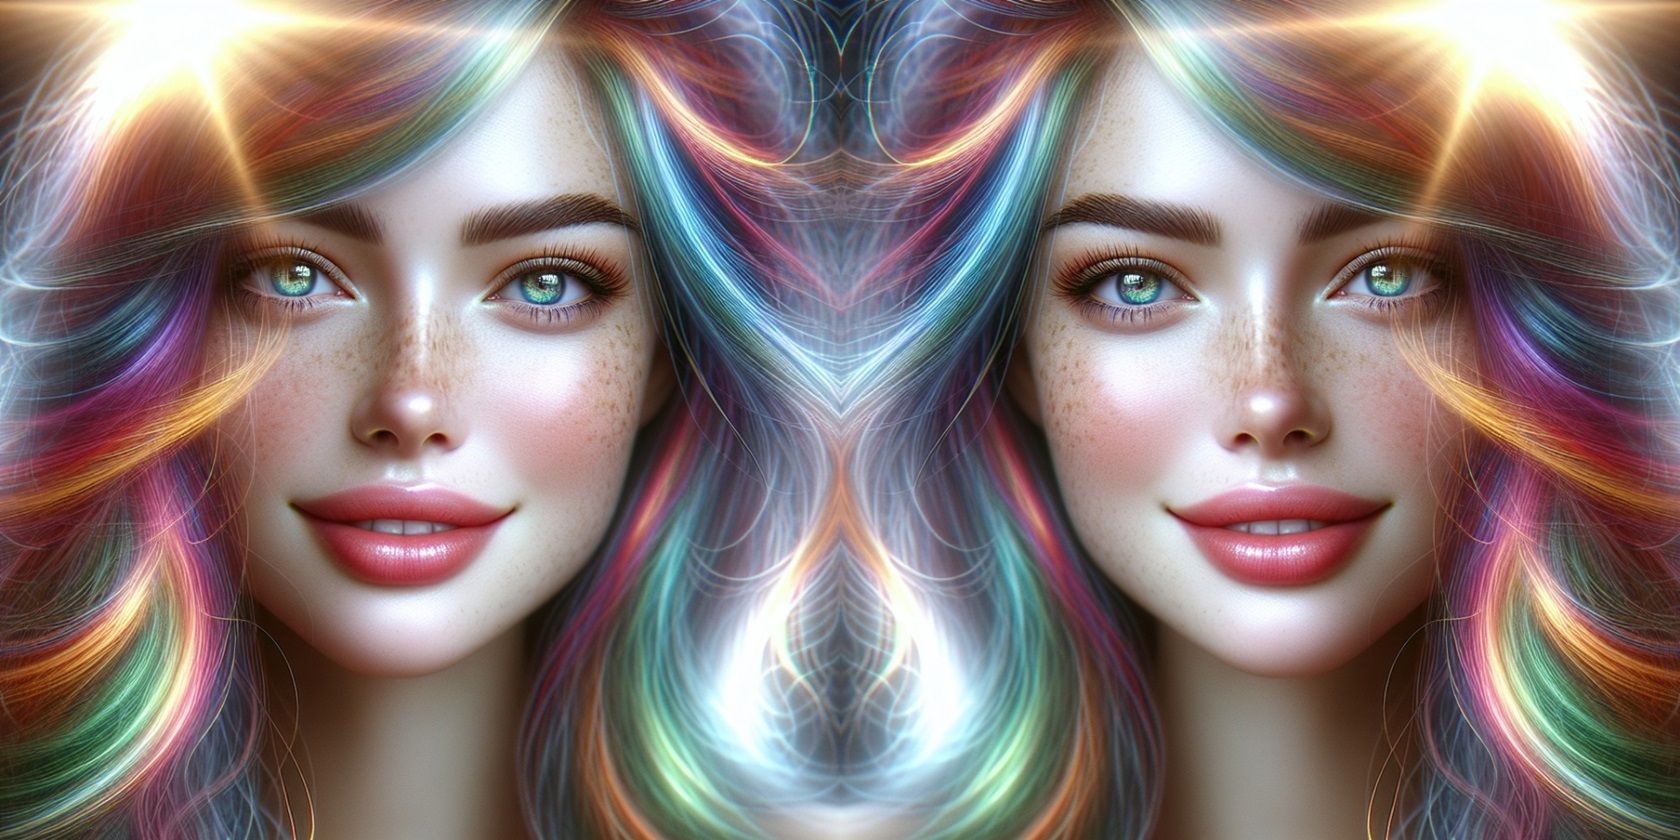 Mirrored AI Portrait of Woman With Colorful Hair